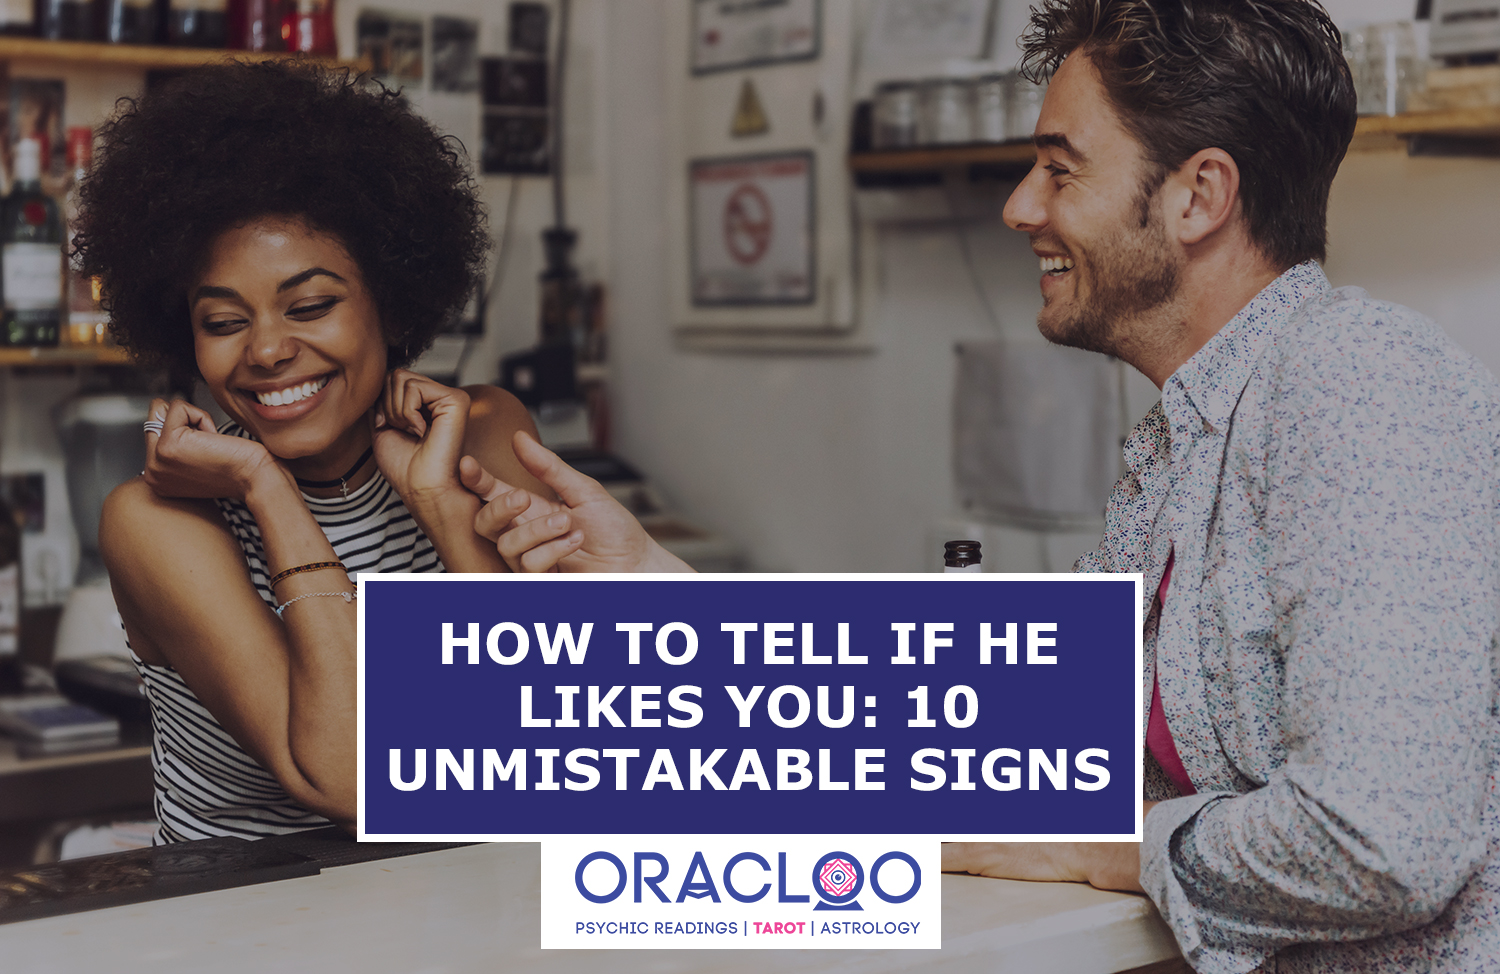 Oracloo How To tell if he likes you: the 10 unmistakable signs